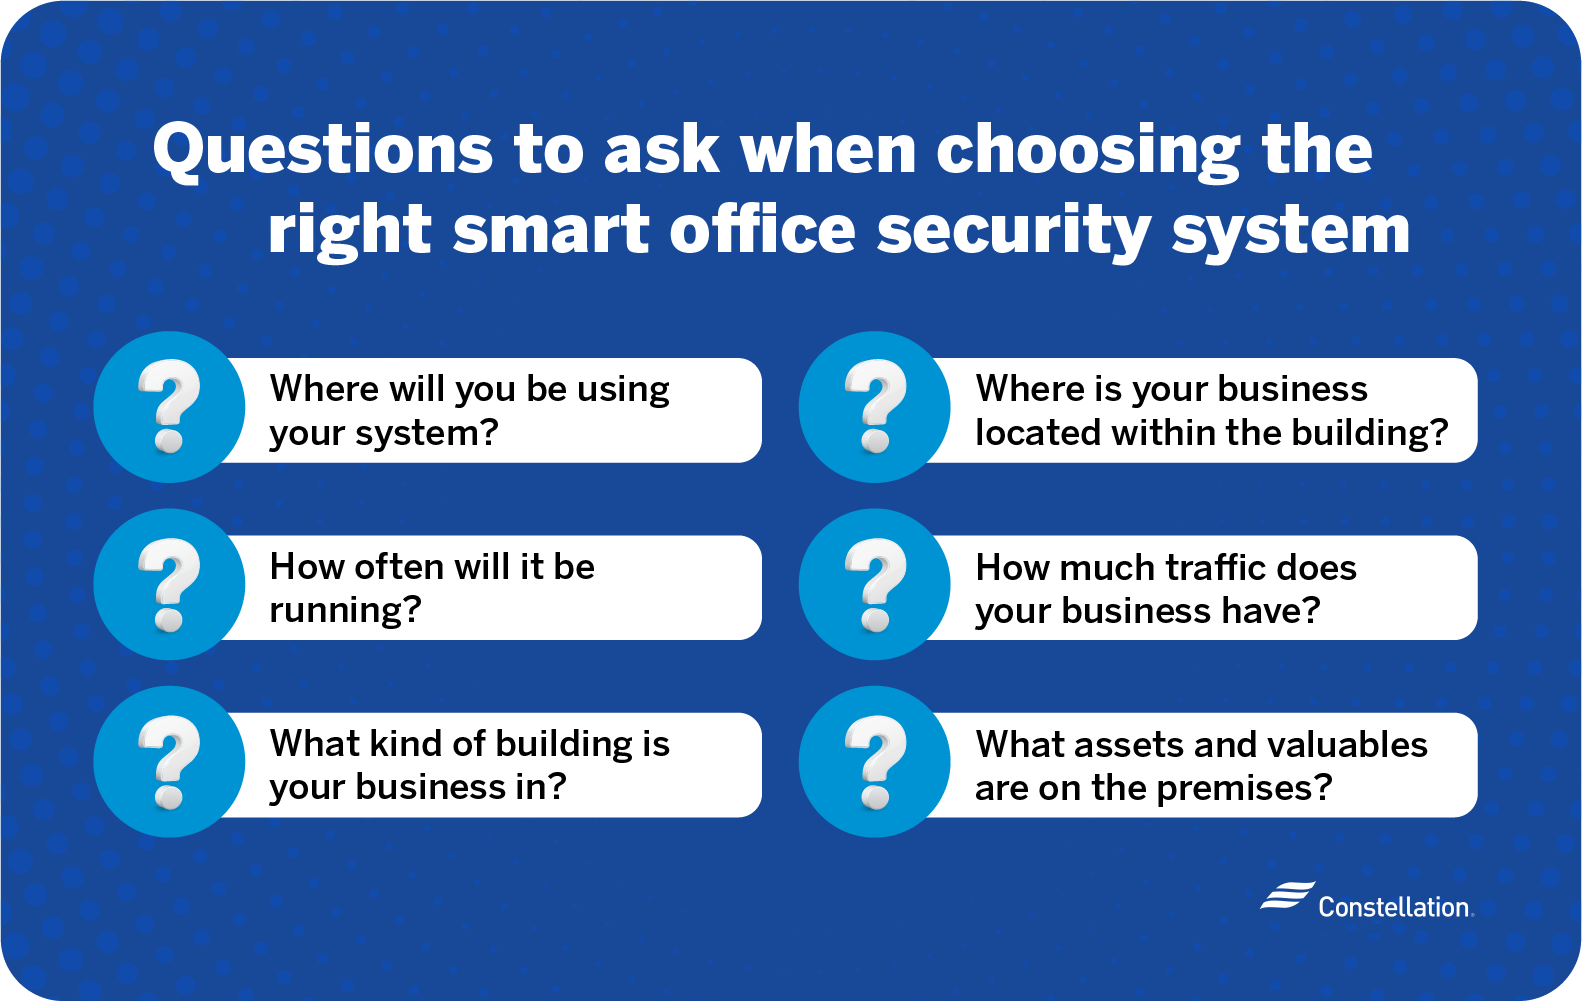 Questions to ask when choosing the right smart office security system